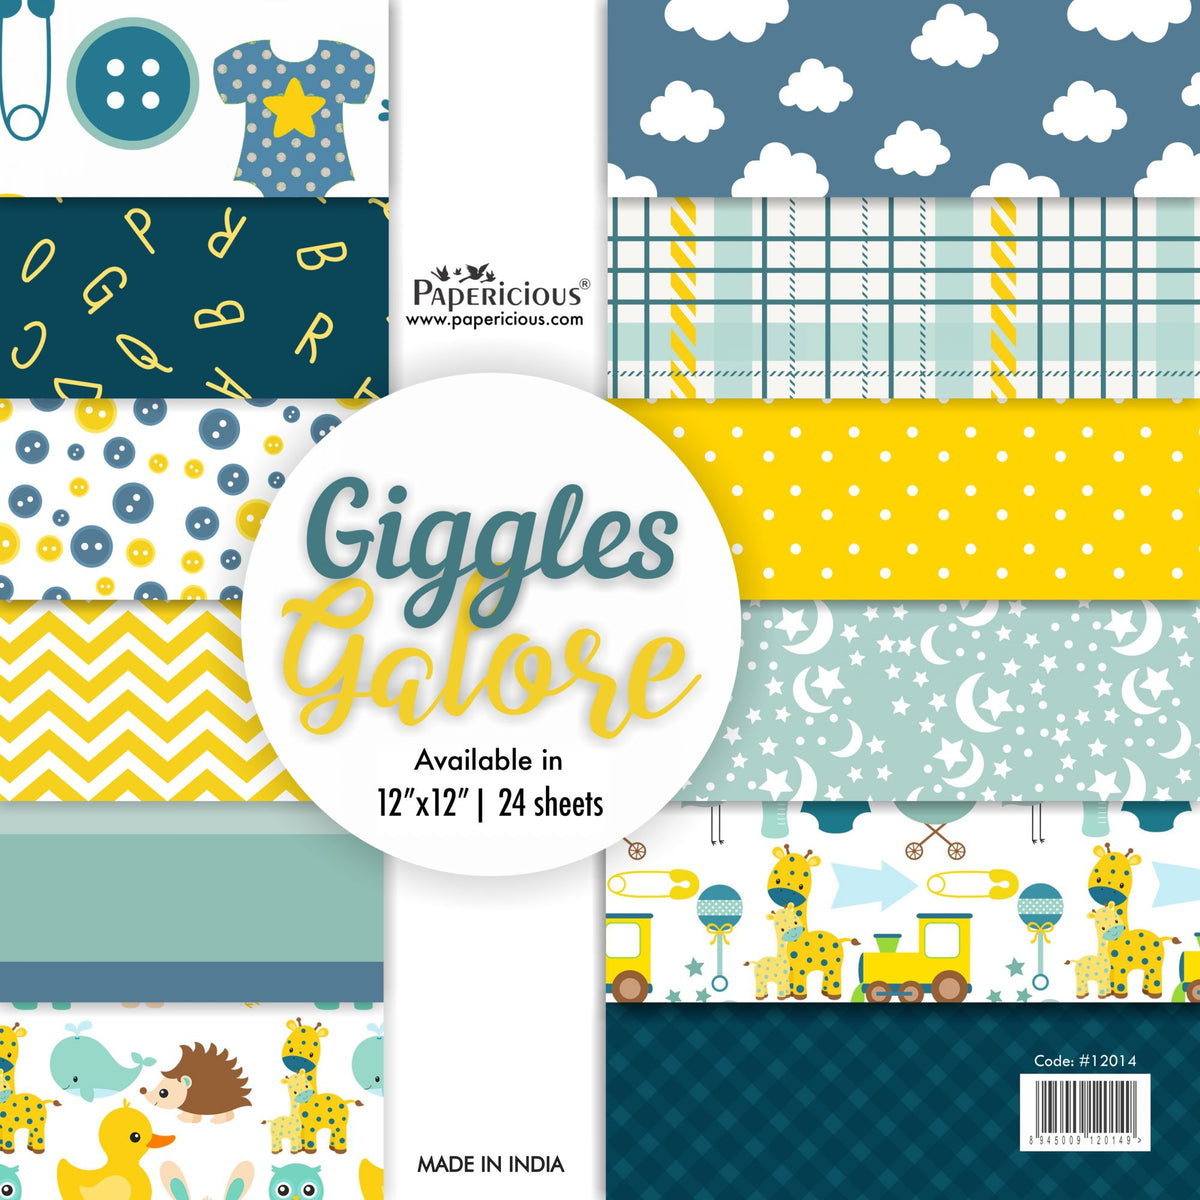 PAPERICIOUS - Giggles Galore- Designer Pattern Printed Scrapbook Papers / 24 sheets